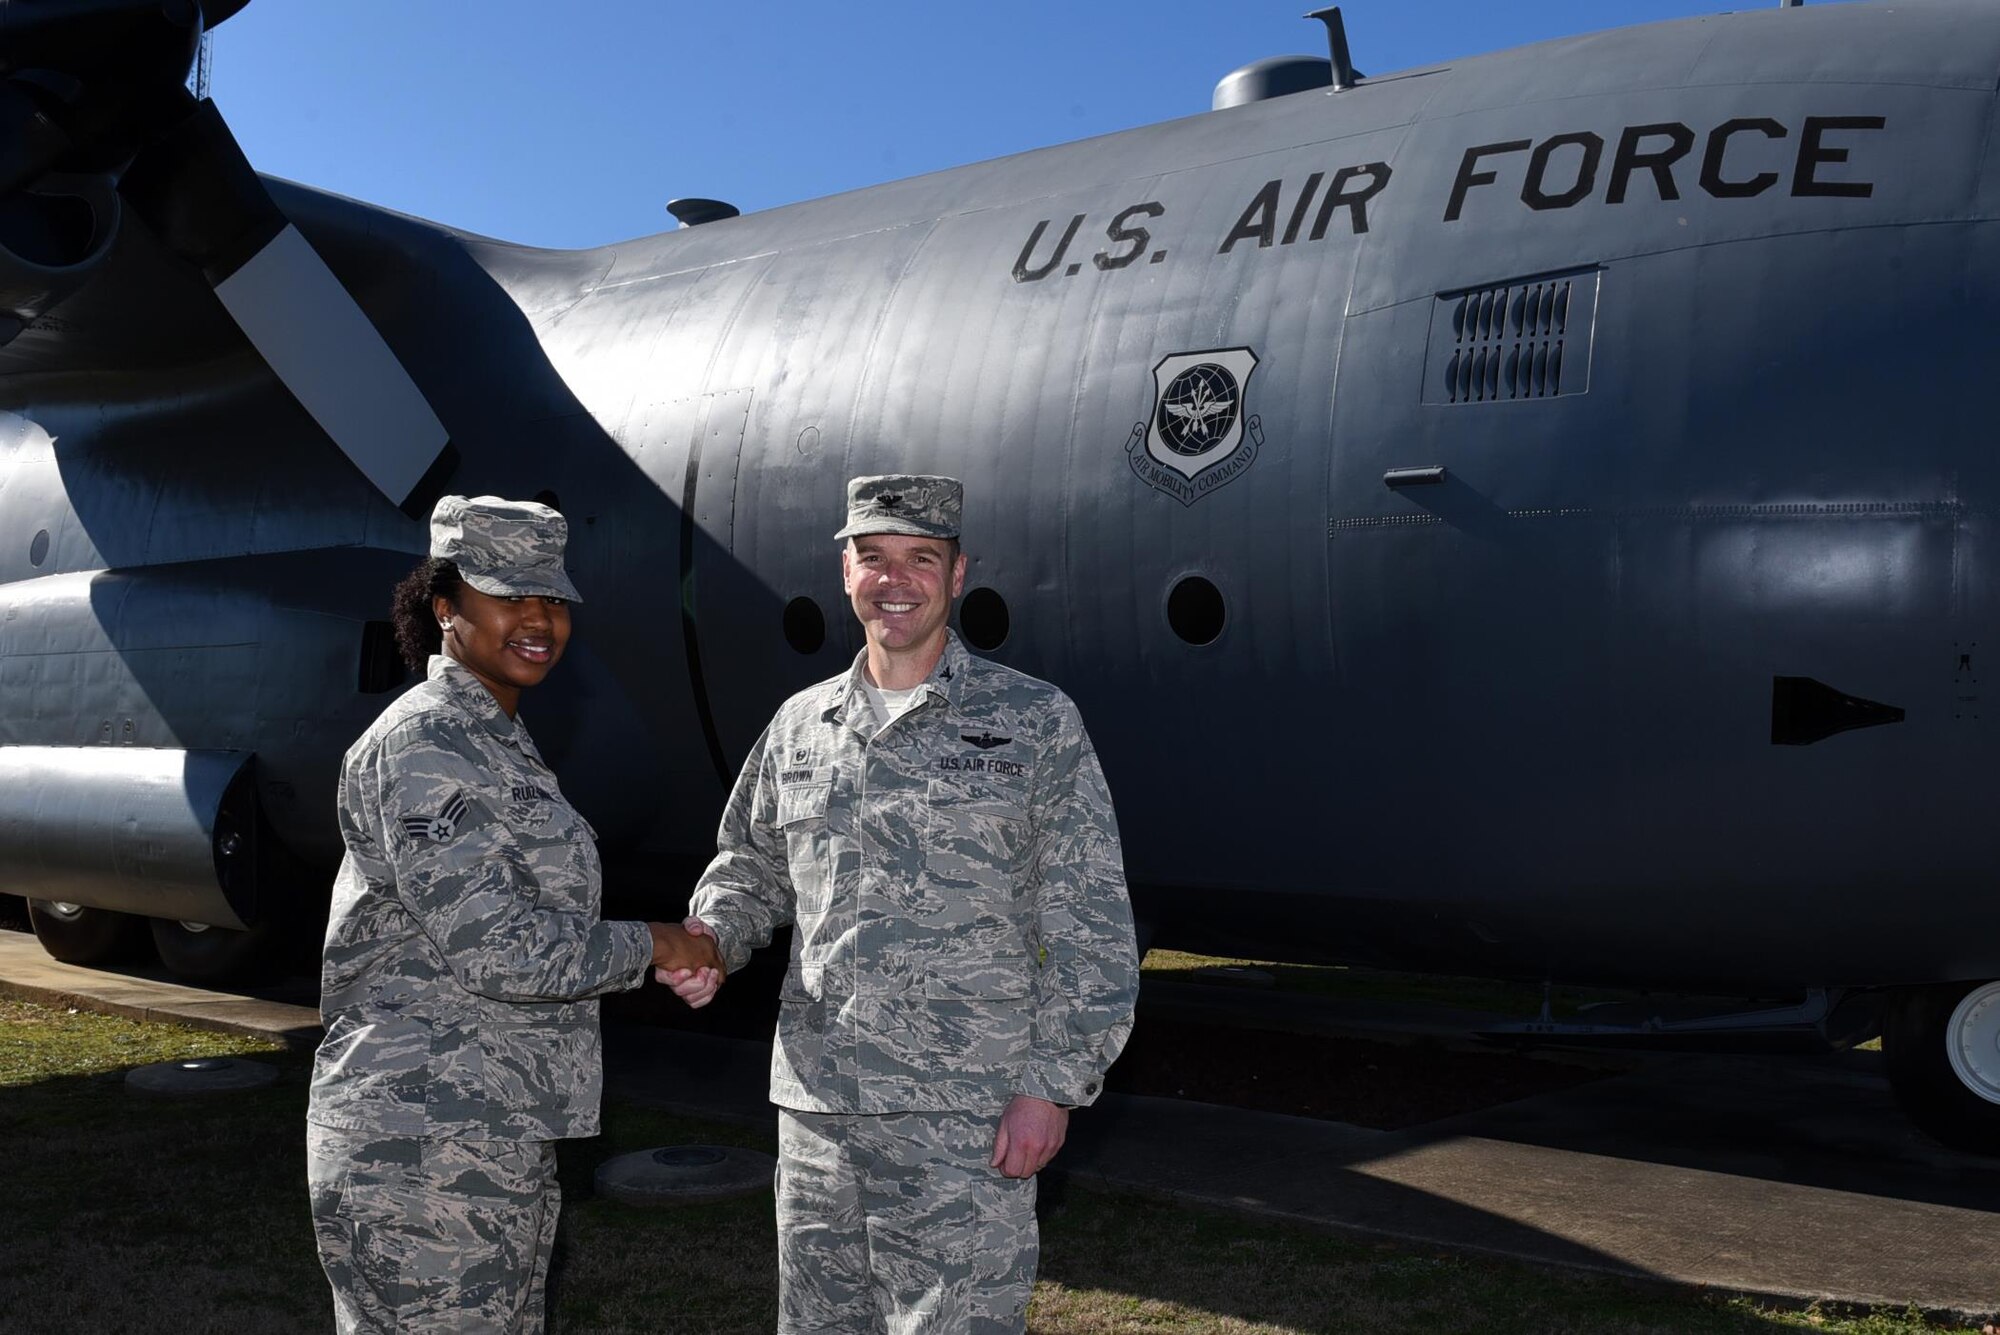 U.S. Air Force Col. Charles Brown, 19th Airlift Wing commander, congratulates U.S. Air Force Senior Airman Brianna Ruiz-Garcia, 19th Communications Squadron command support staff, as the Combat Airlifter of the Week Jan. 30, 2017, at Little Rock Air Force Base, Ark. (U.S. Air Force photo by Airman Kevin Sommer)